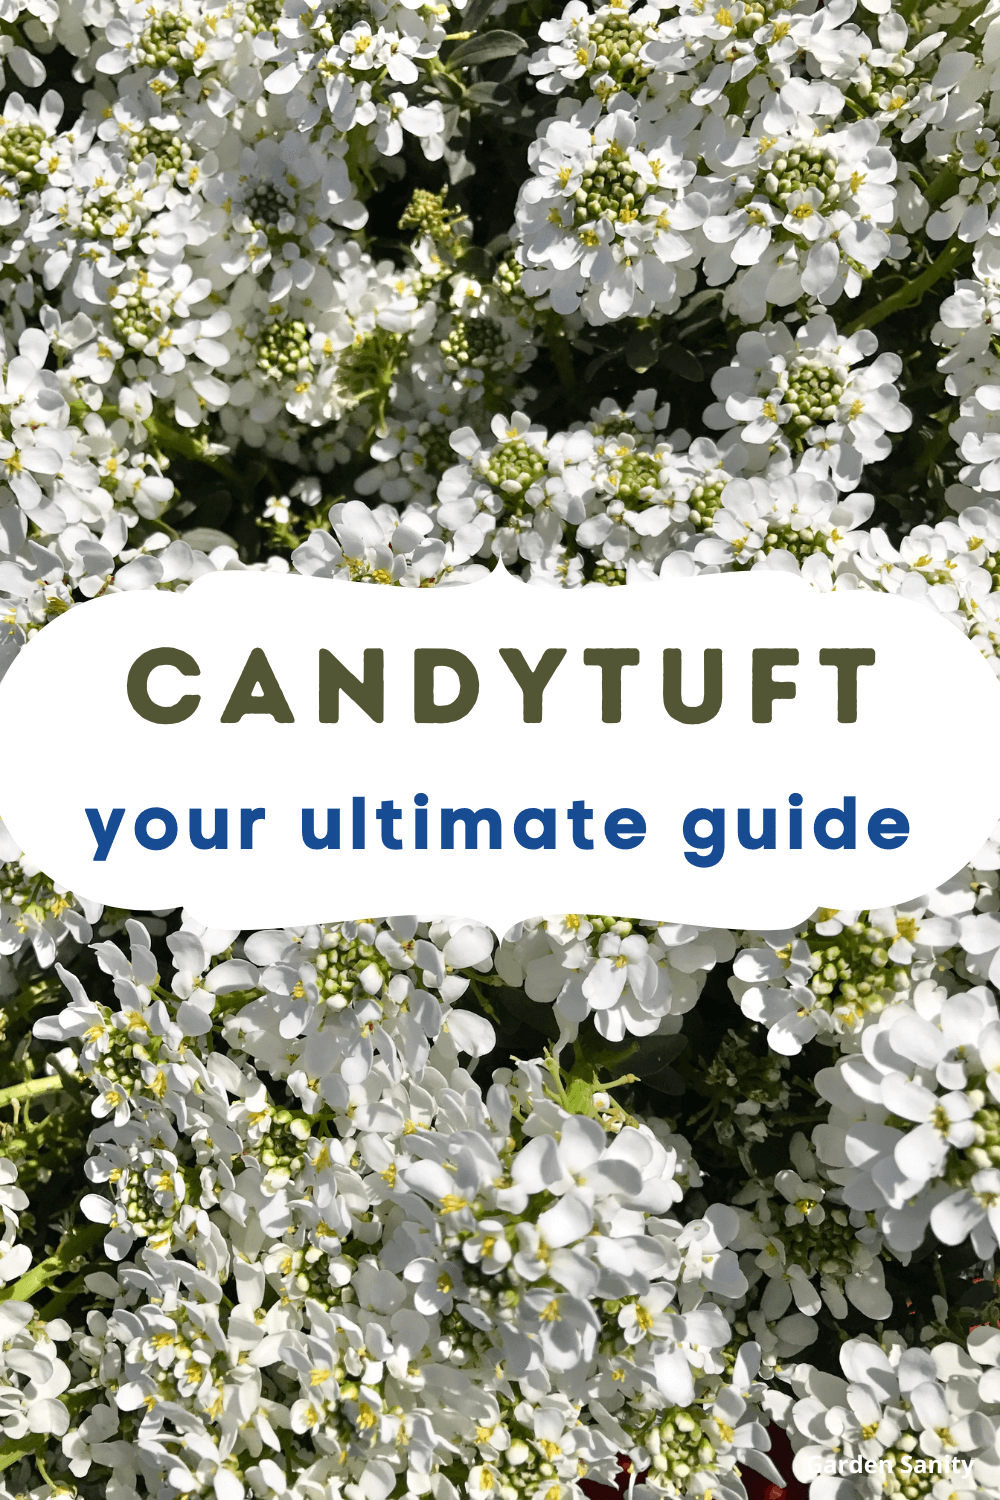 Candytuft: Your Ultimate Guide showing the pretty white flowers up close